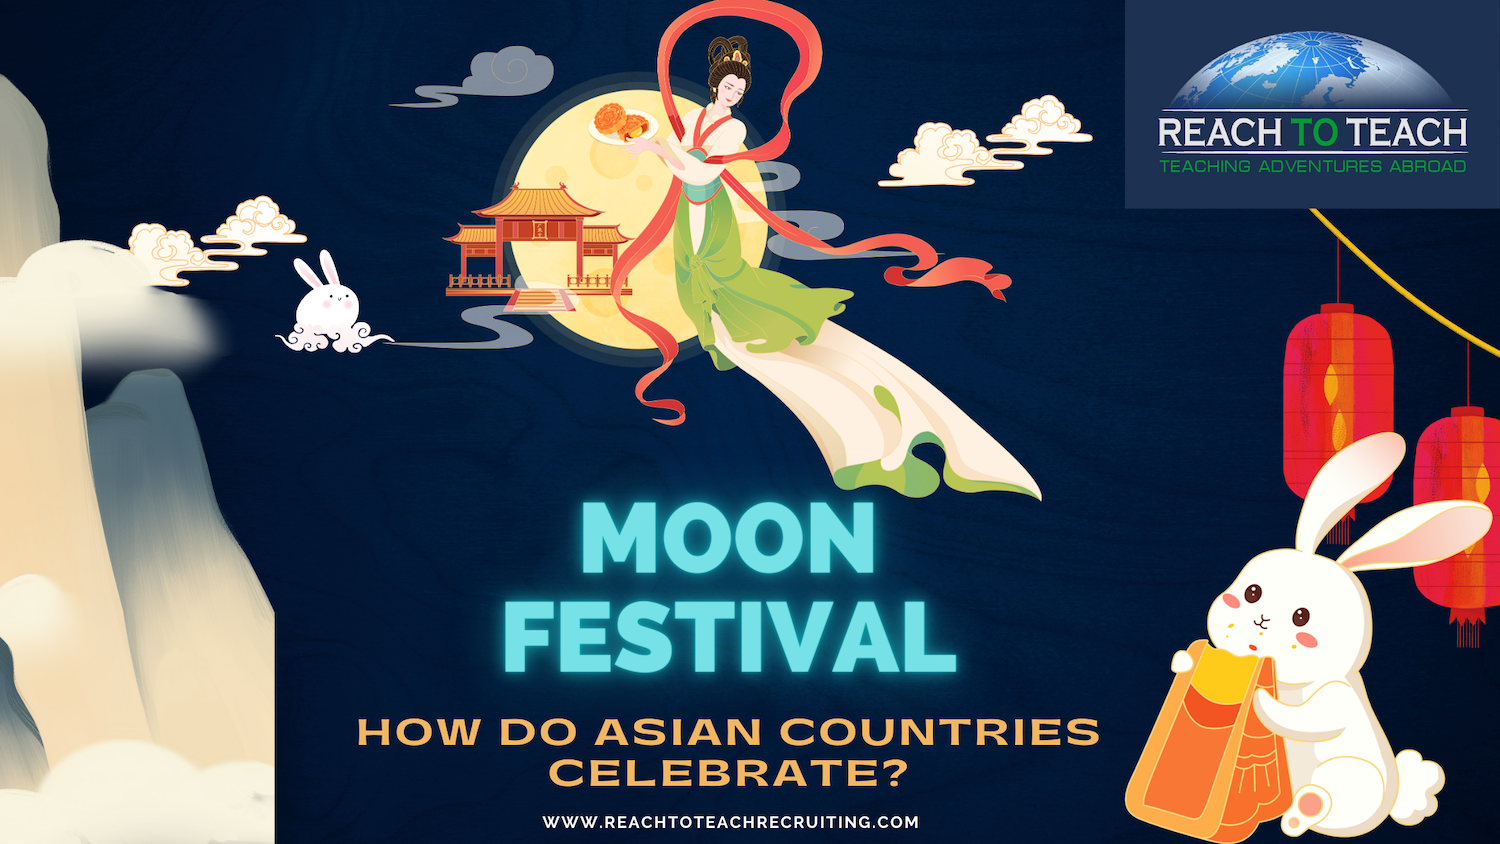 A banner image from Reach To Teach Recruiting with the text Moon Festival: How Do Asian Countries Celebrate? The banner includes Chang-e in a long flowing green and cream dress holding mooncakes while floating over the moon. A rabbit holding a bag of mooncakes is gazing at the moon under red lanterns. The images on the banner represent various symbols associated with Moon Festival aka Mid Autumn Festival in Asia.